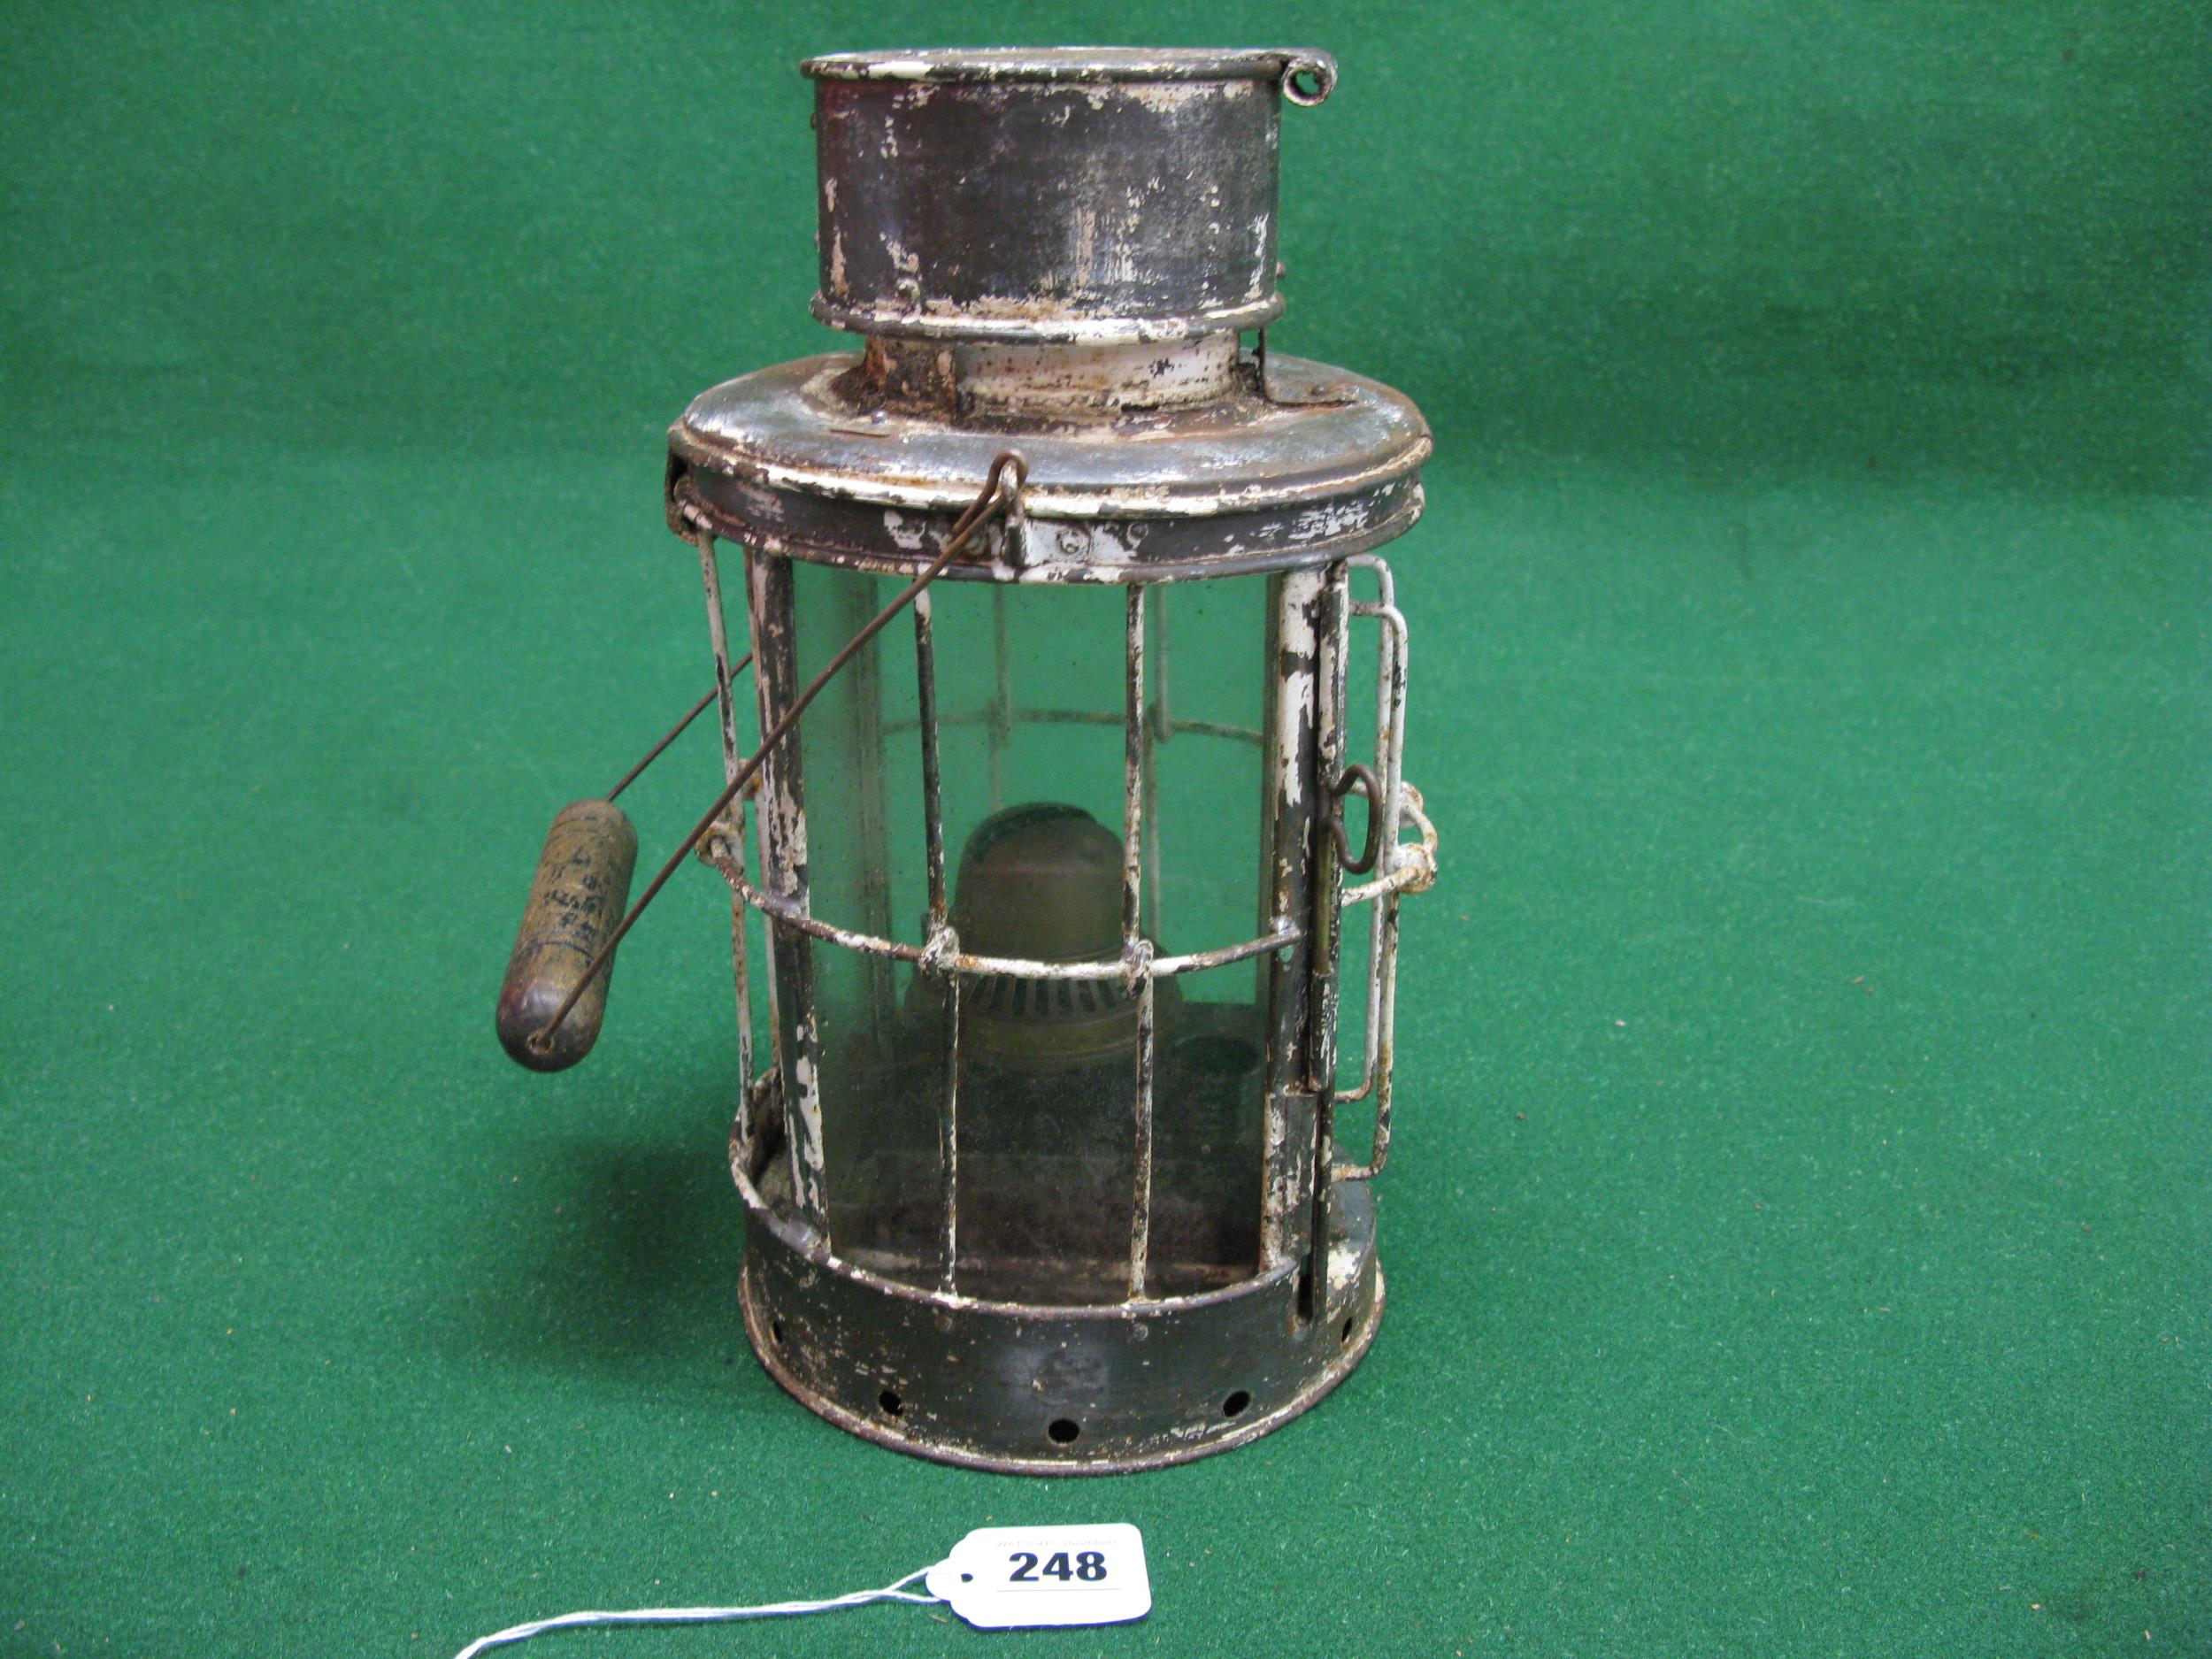 WWI trench lantern with burner, embossed Hink's Birmingham 1918 on lid - 12.5" tall x 6.5" dia - Image 4 of 4